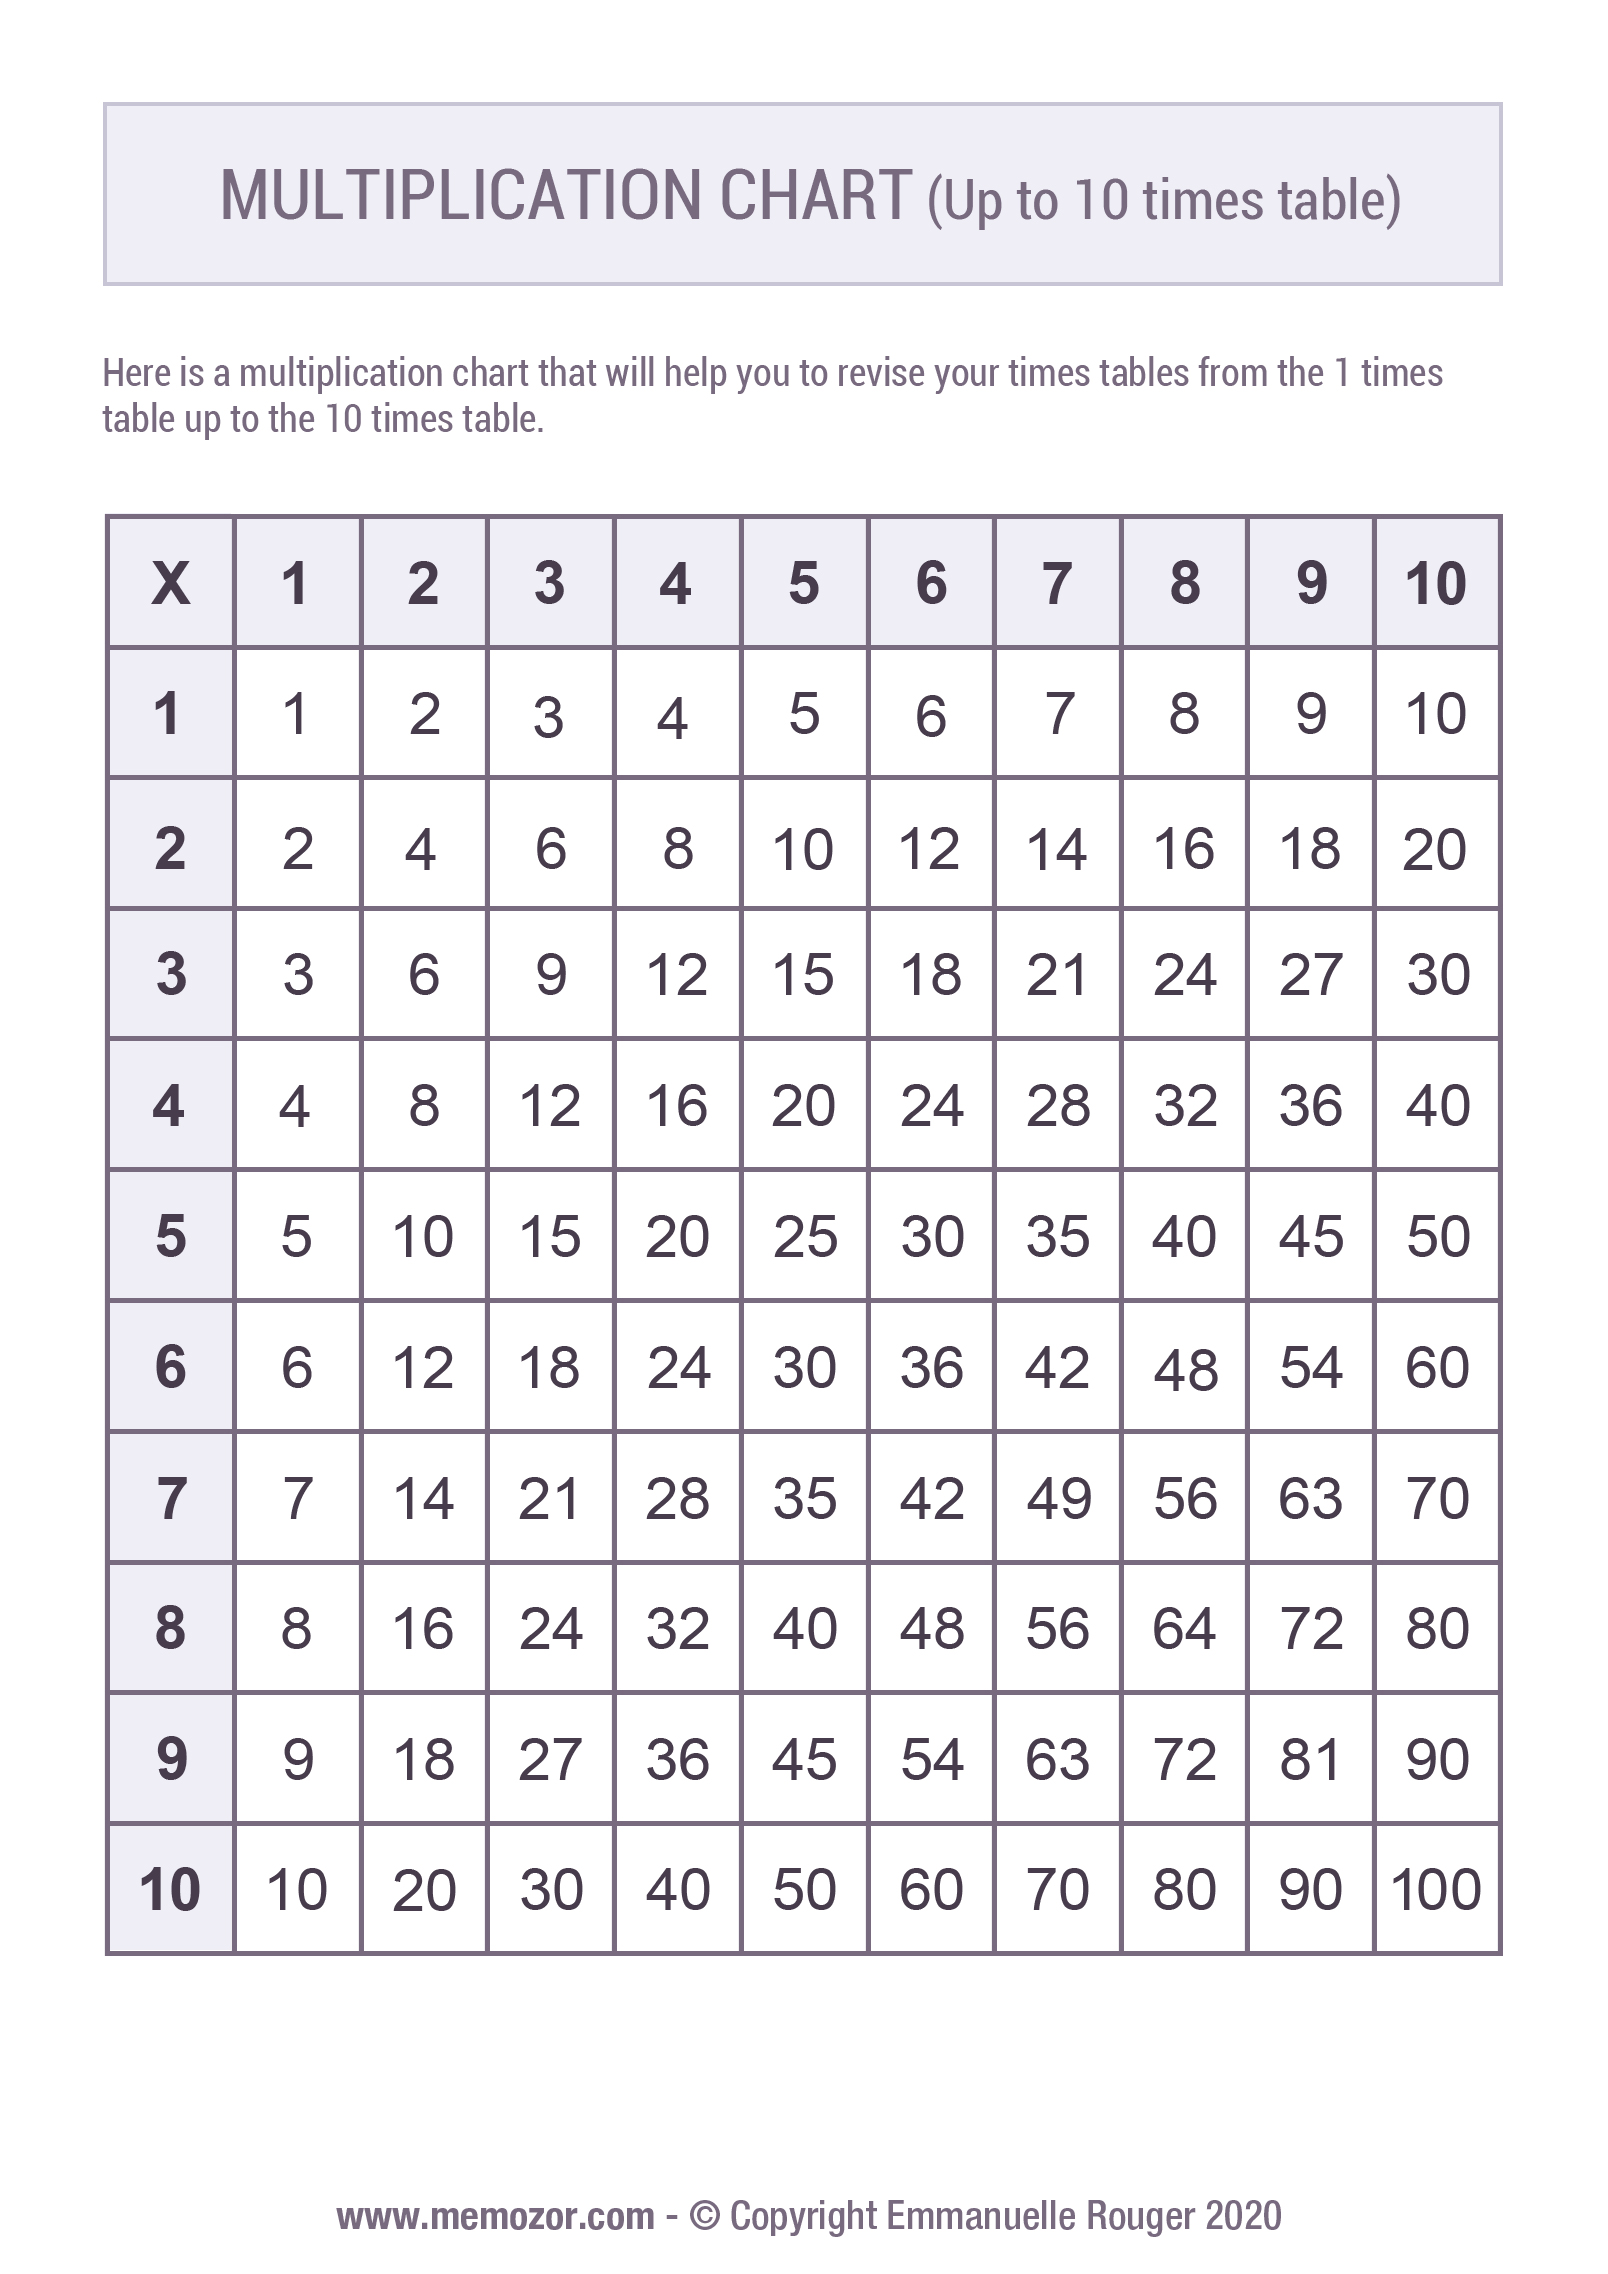 multiplication 3 4 5 times table worksheets